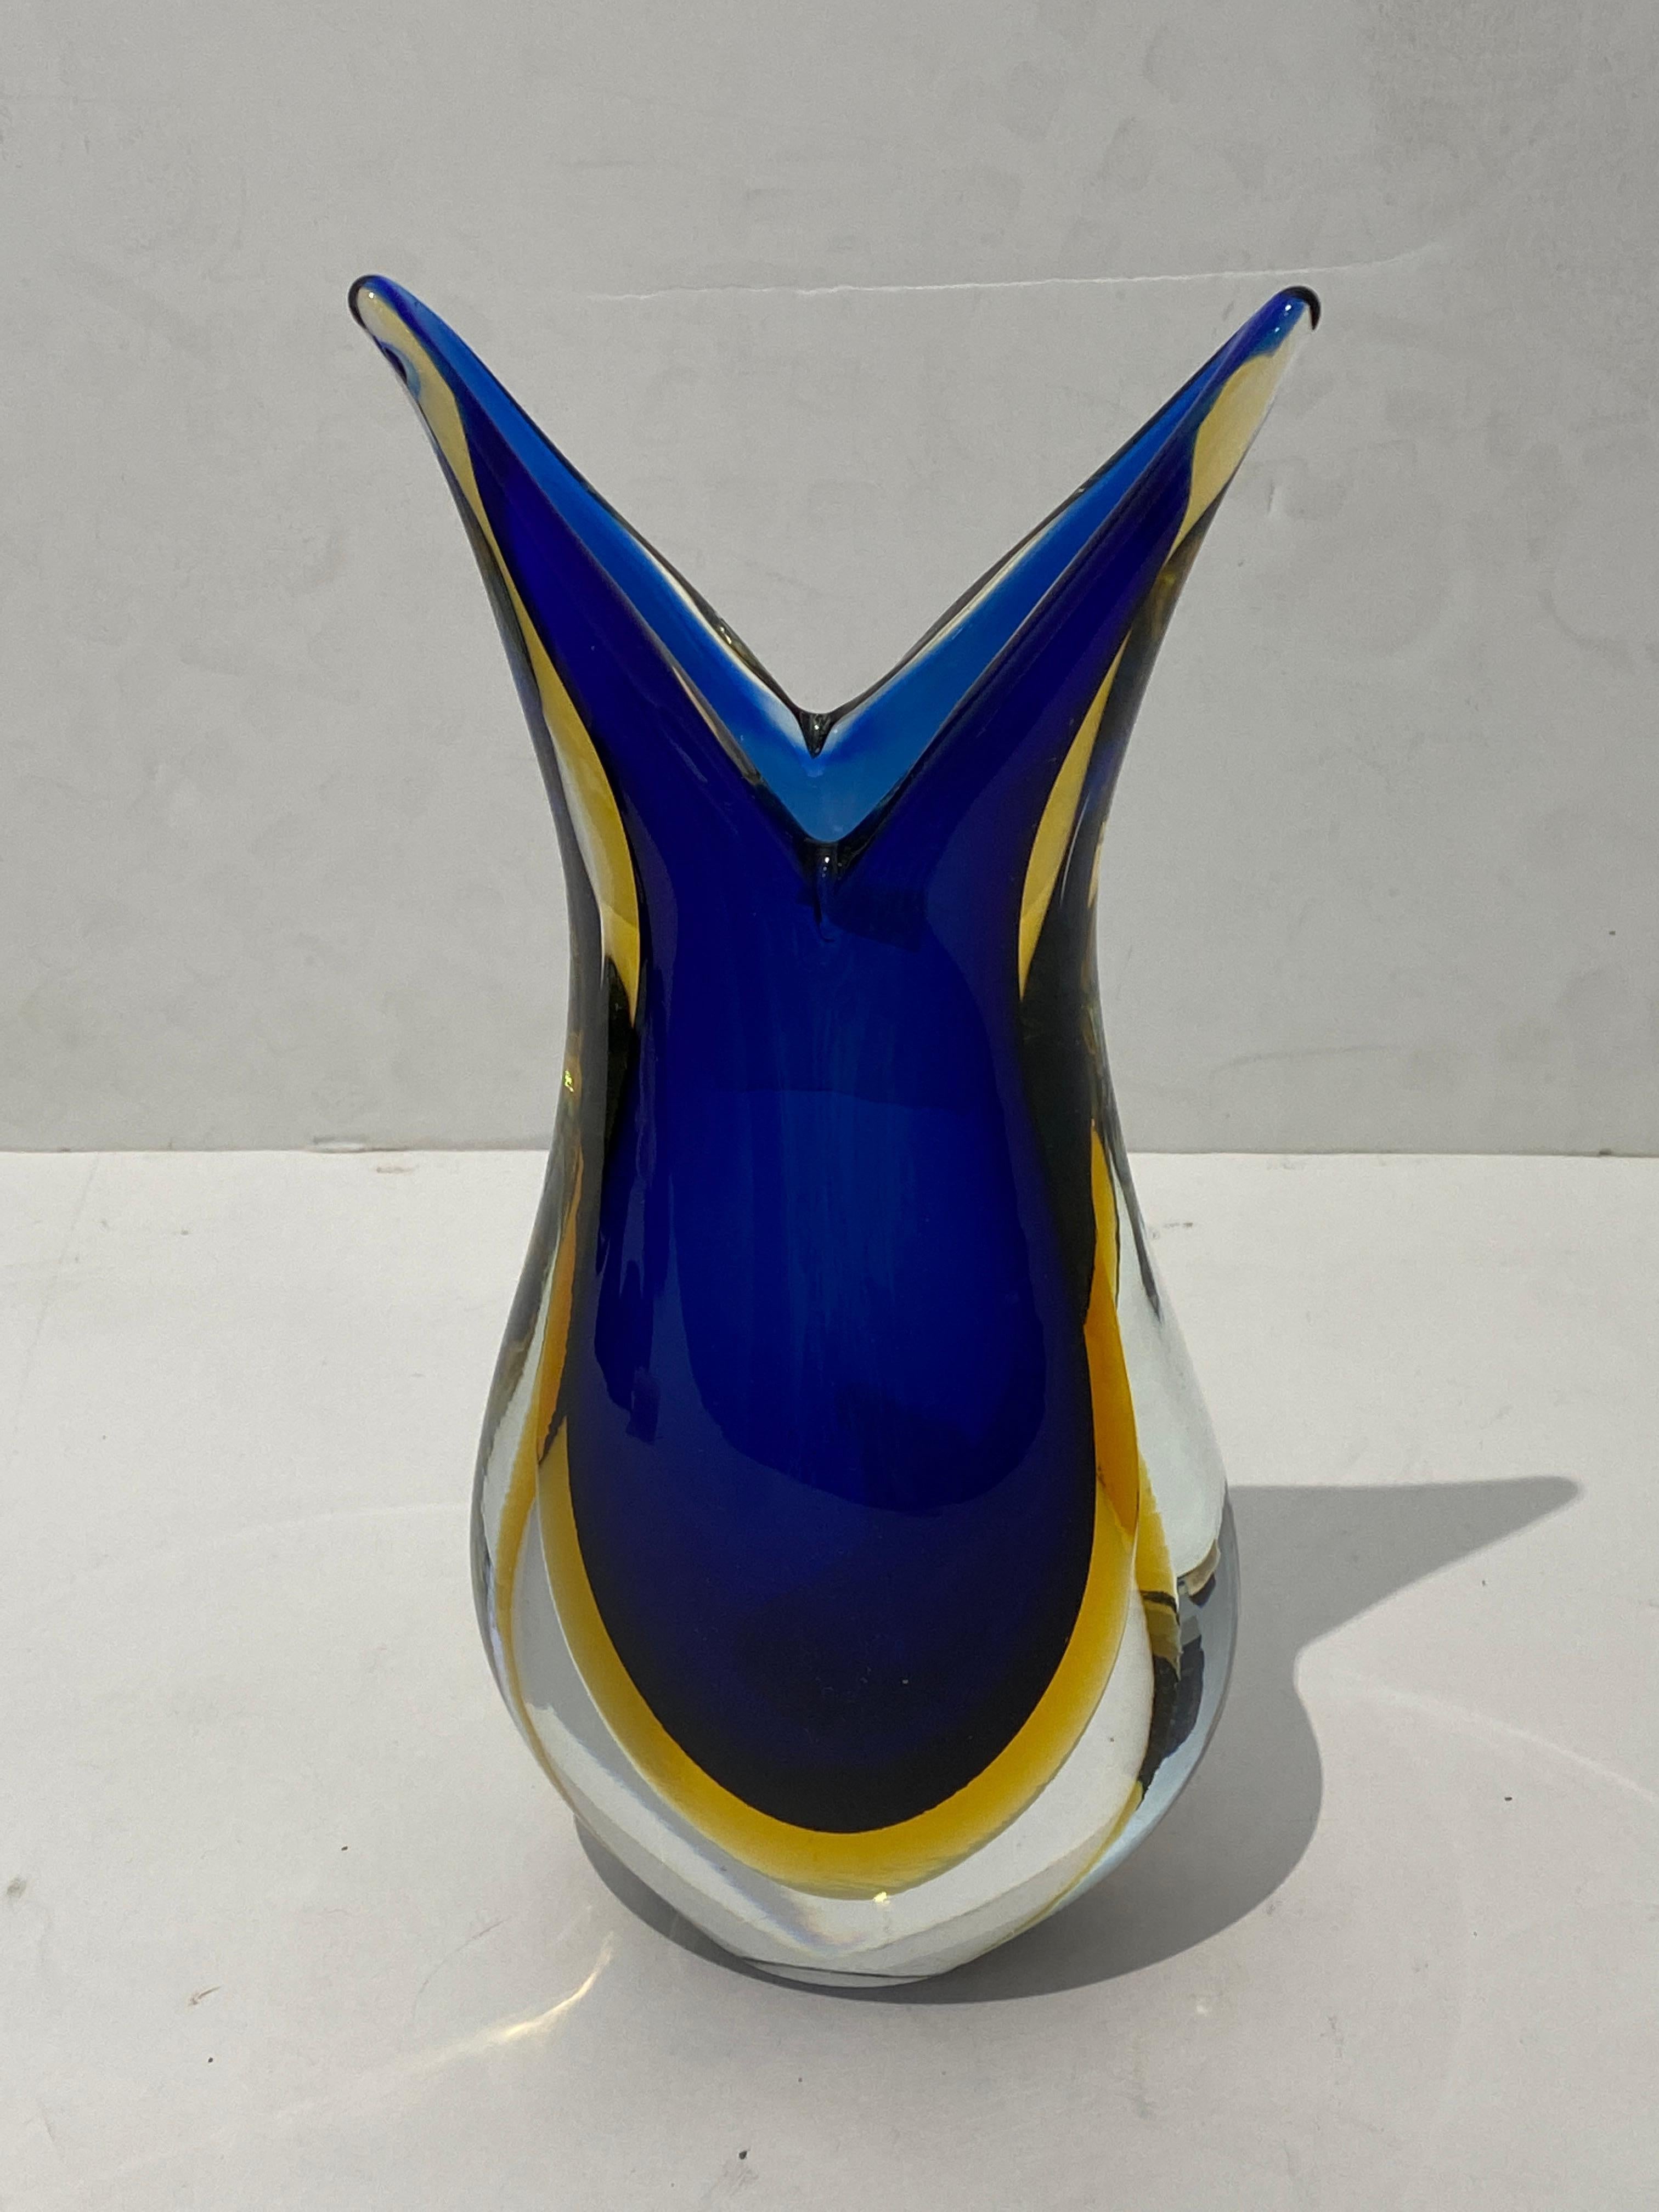 This stylish Italian artisan glass vase will make a subtle statment with its form and coloration, and the sommerso technique is quintessentialy Italian.